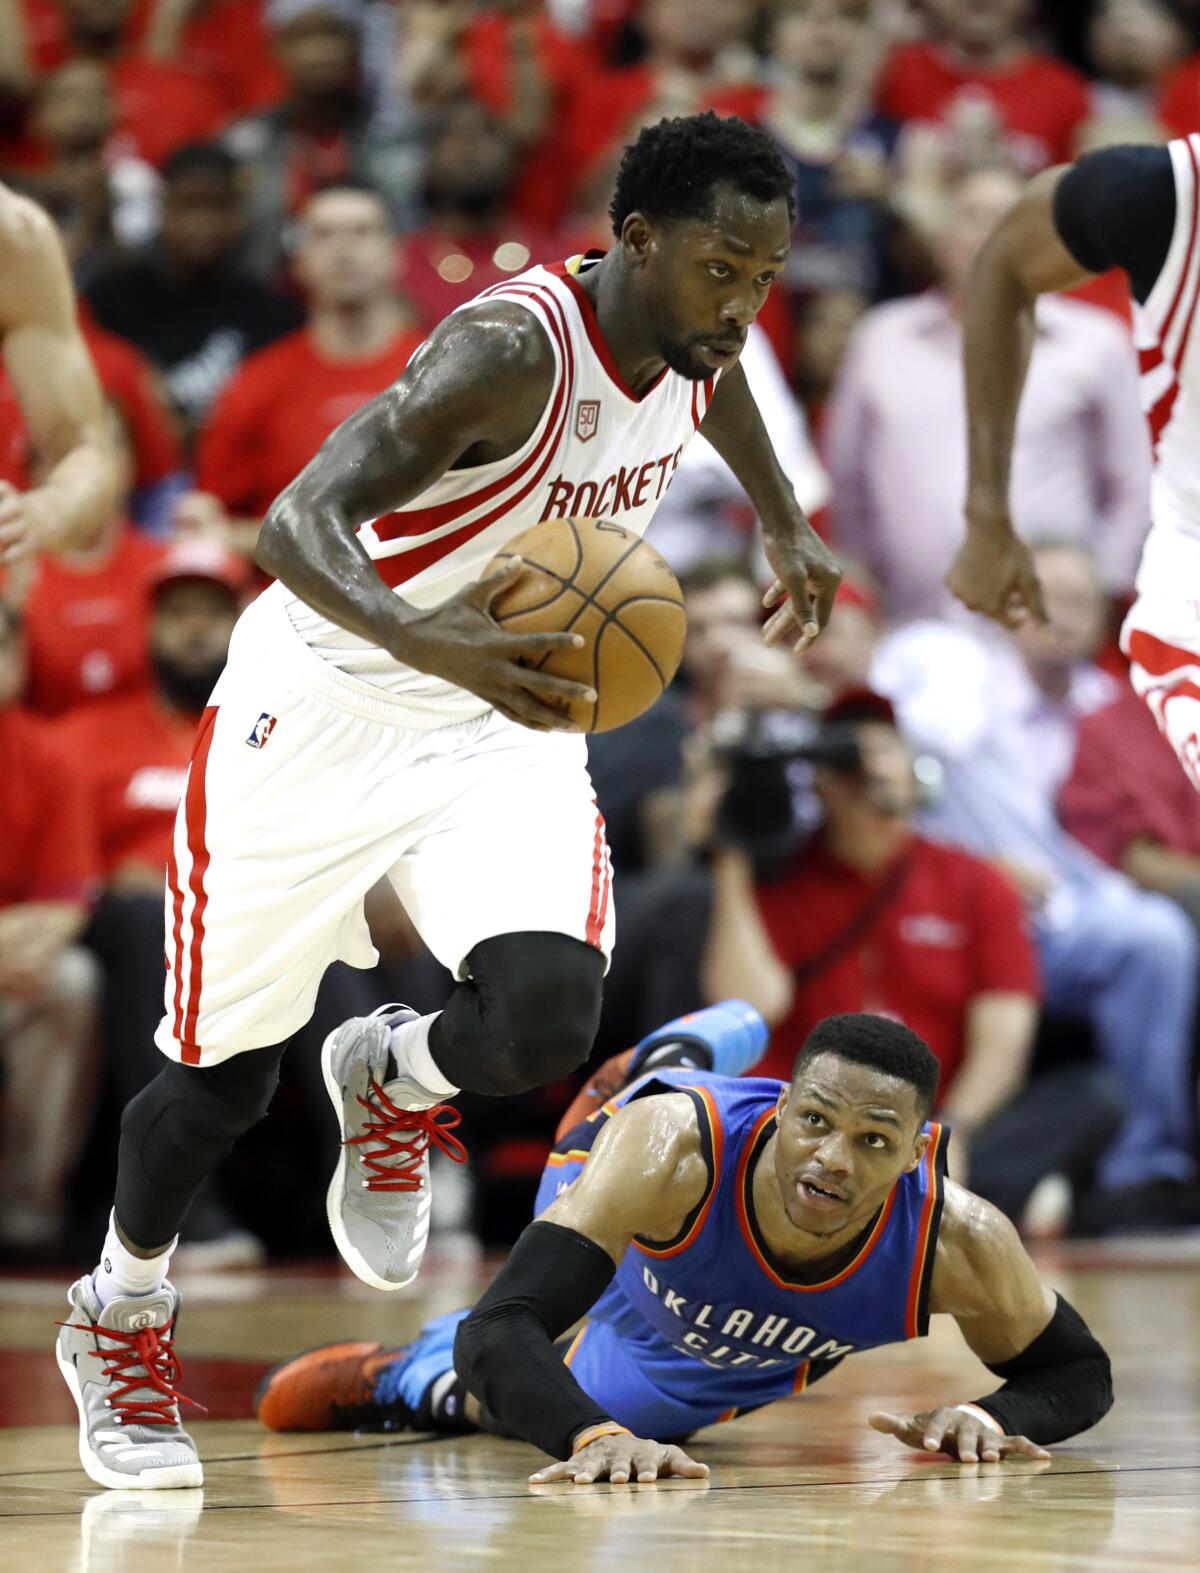 Rockets guard Patrick Beverley steals the ball from Thunder guard Russell Westbrook during a playoff game in 2017.